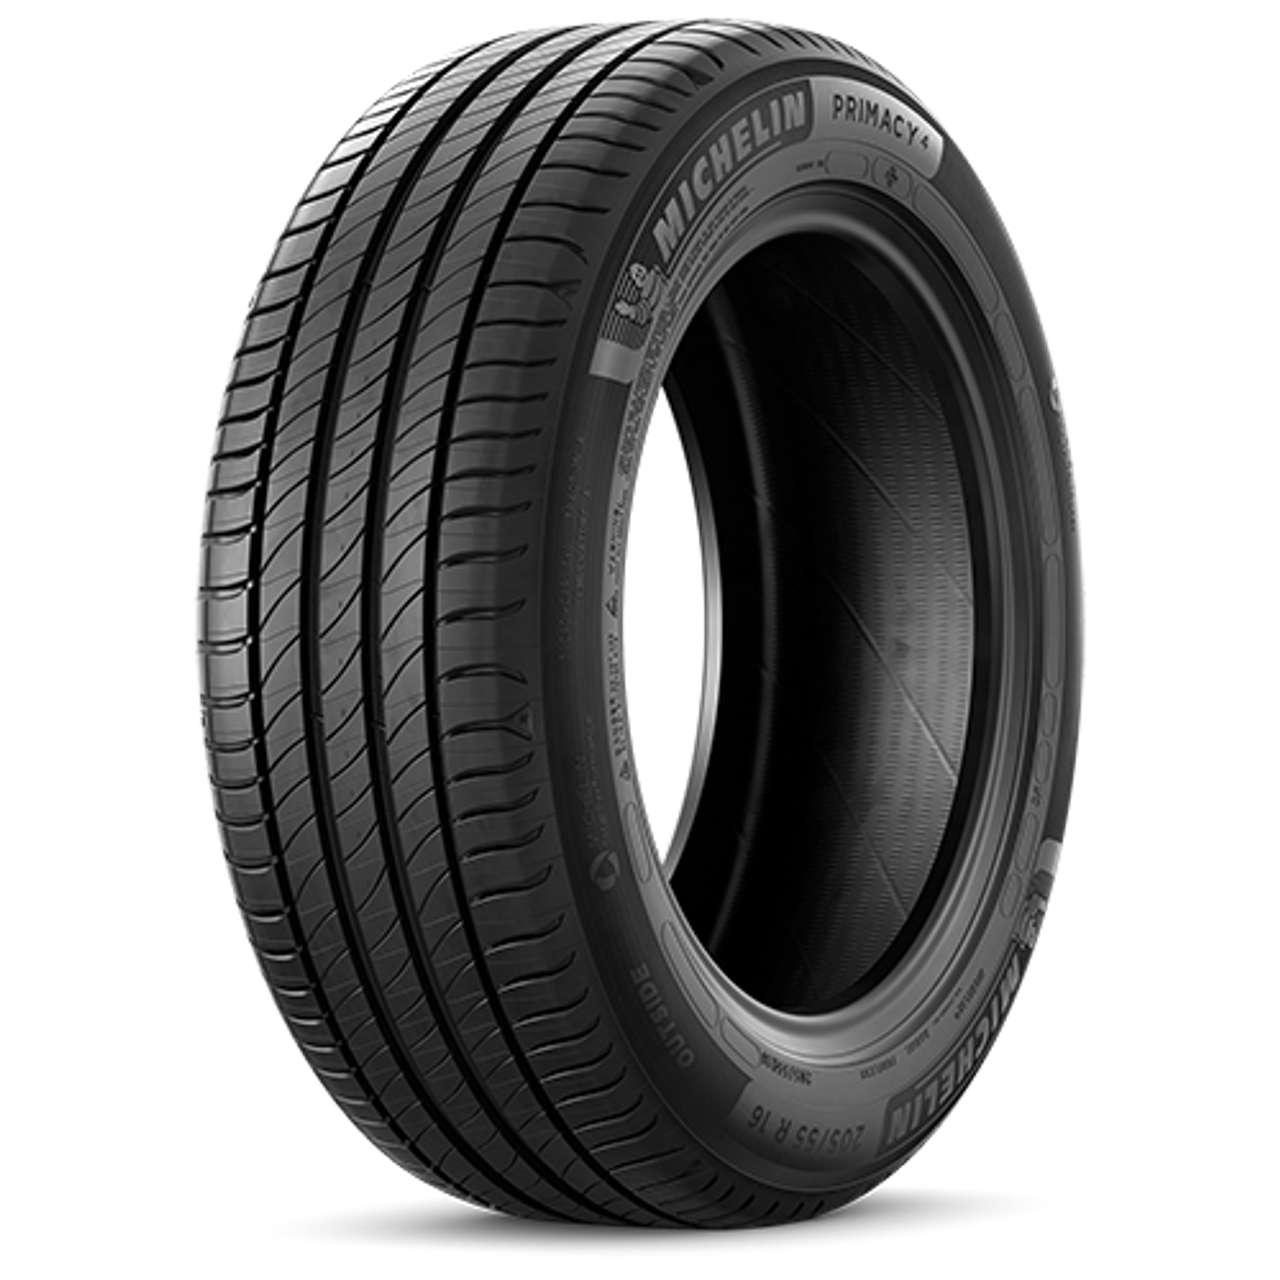 MICHELIN PRIMACY 4+ 215/60R17 96H BSW